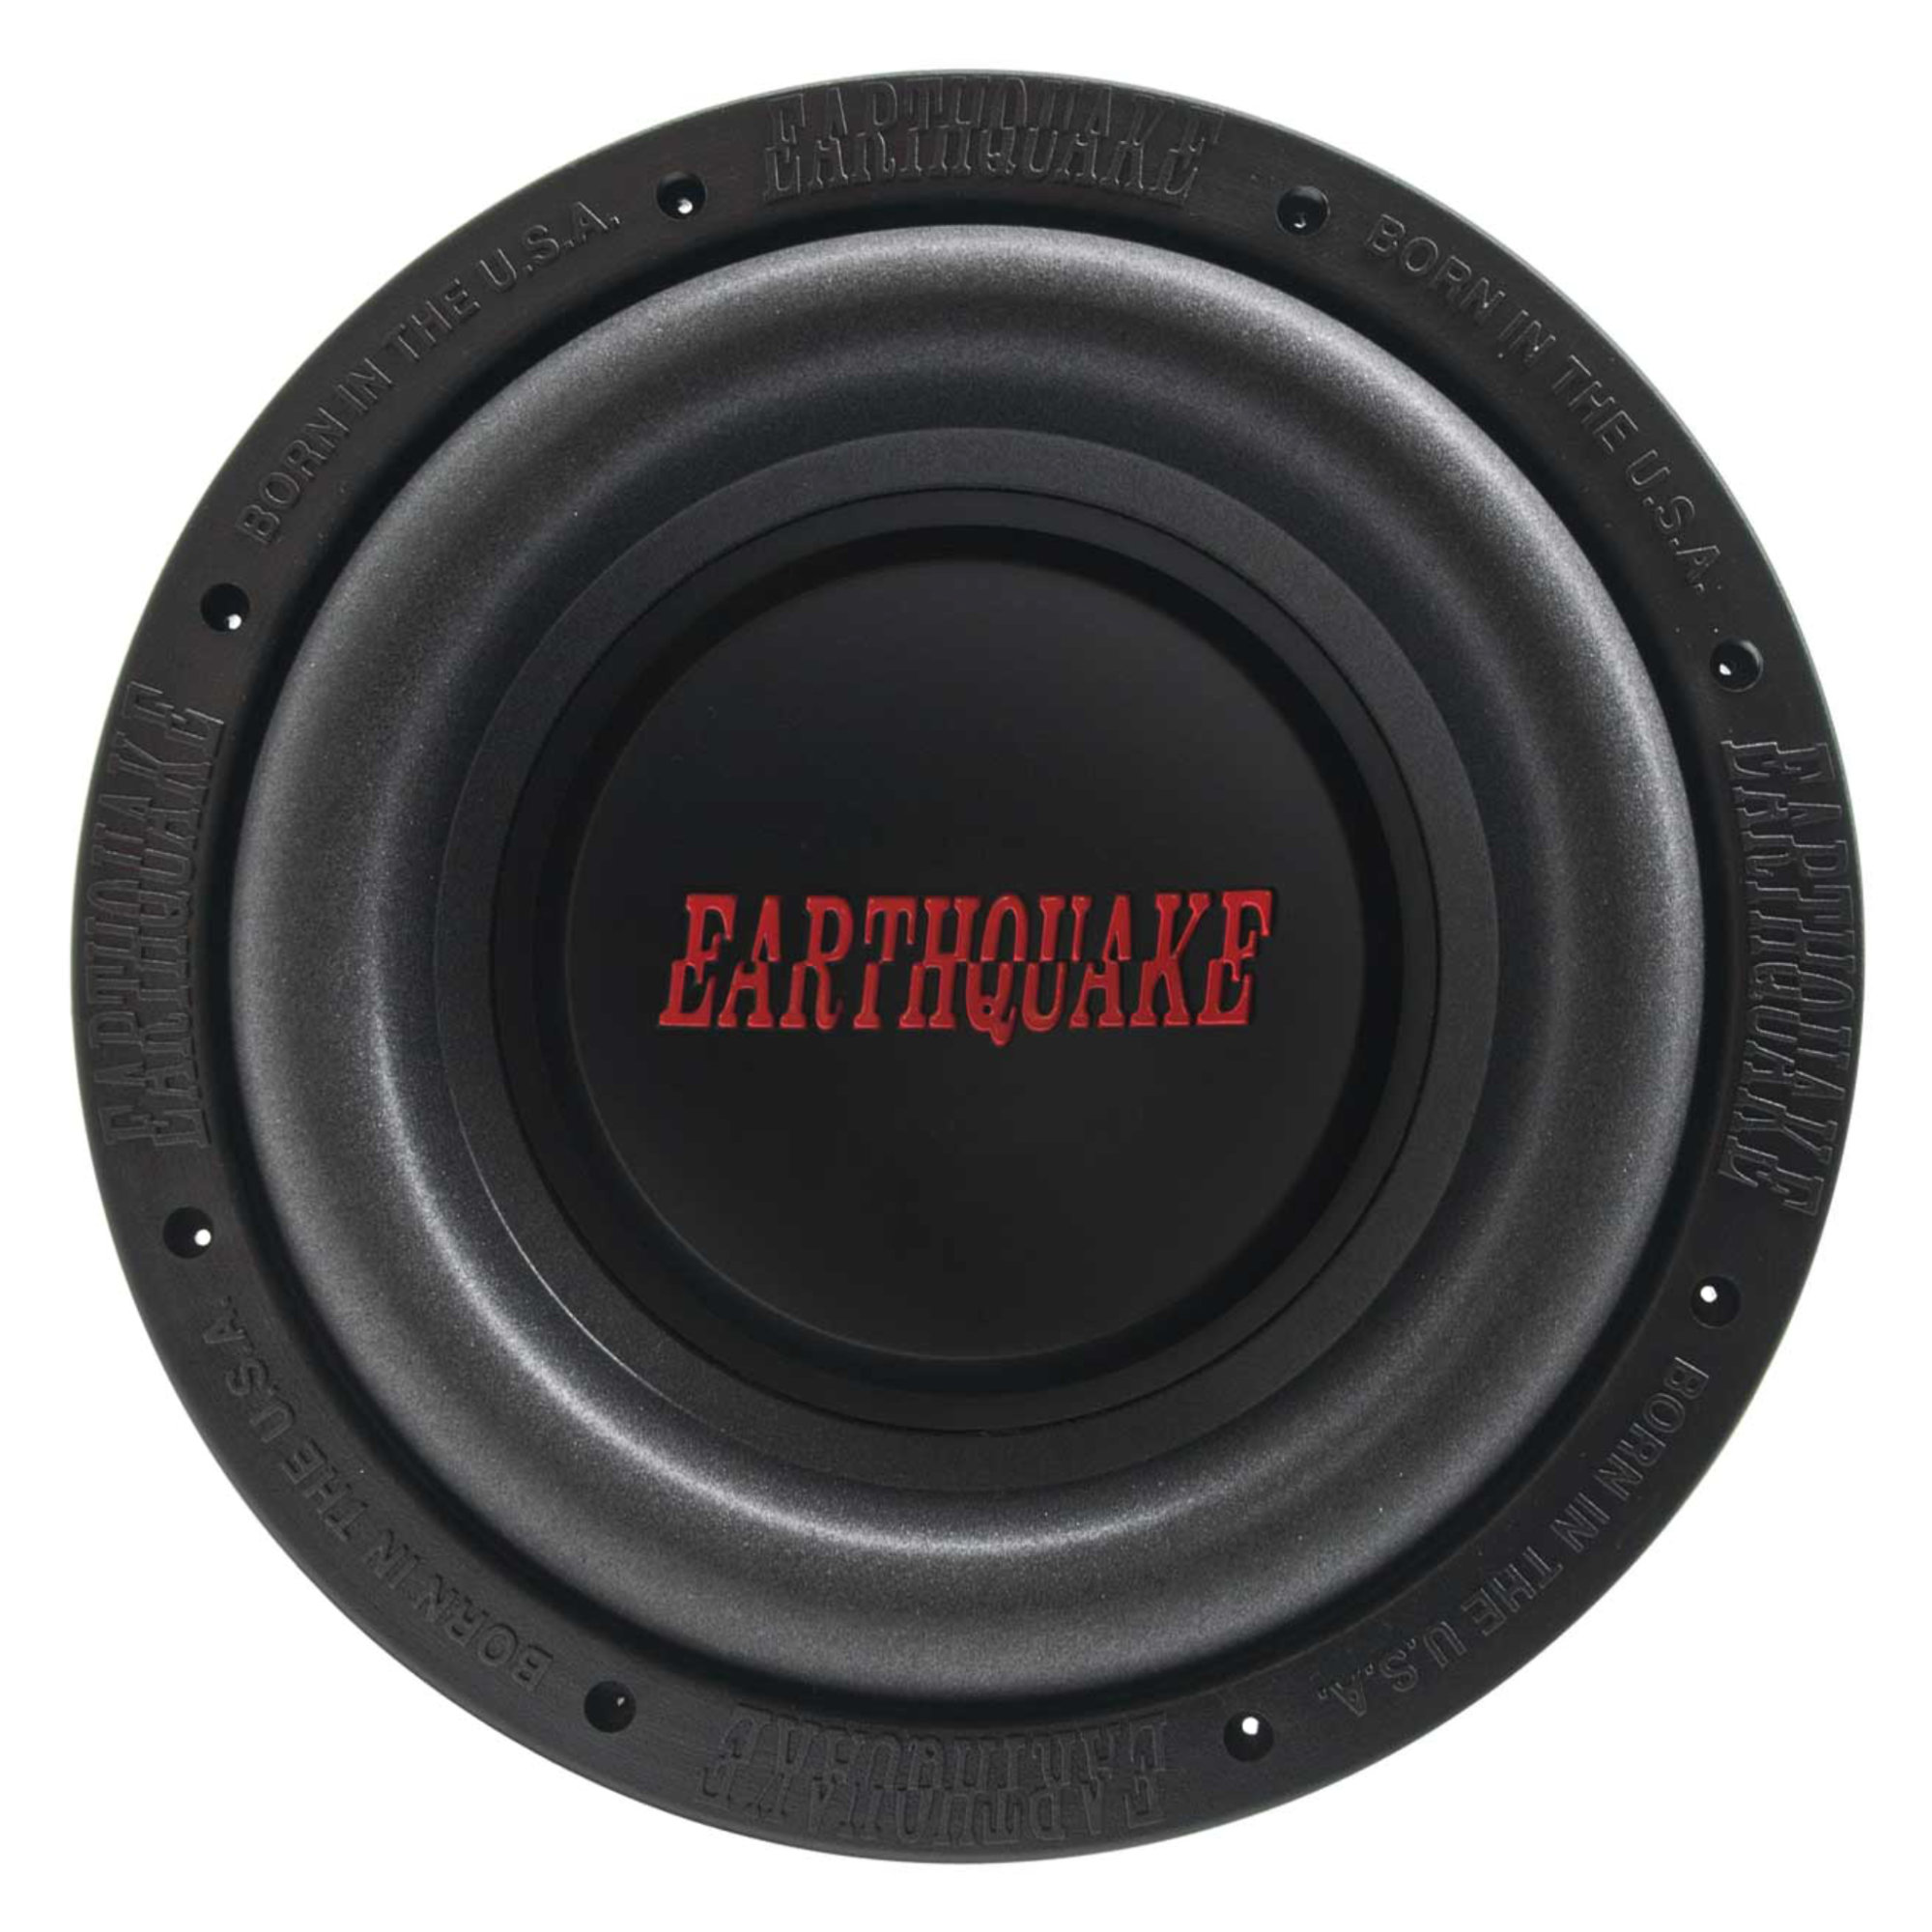 USB/SD Black Earthquake Sound DJ-Quake 12-inch 1000-Watt Subwoofer with Built-In Amplifier and Bluetooth 